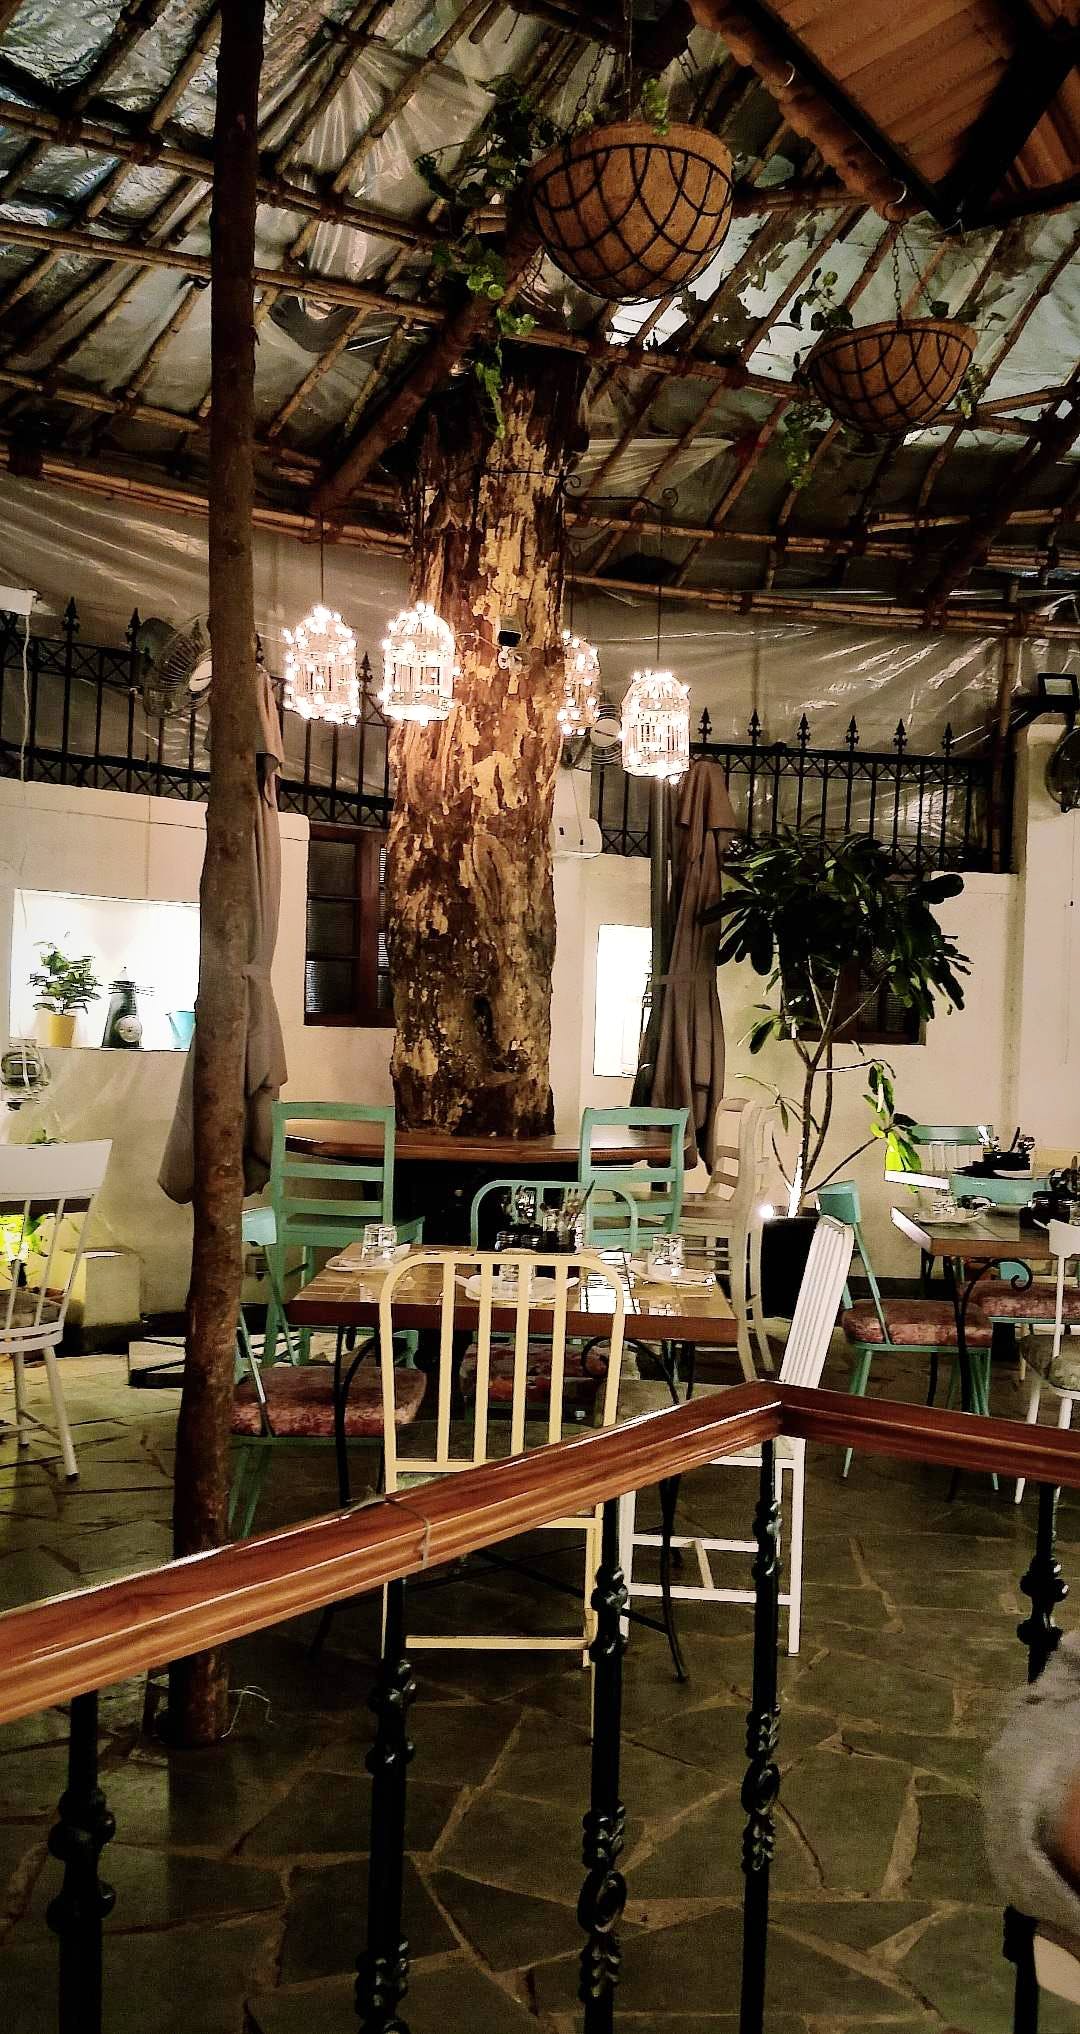 Furniture,Table,Room,Building,Interior design,Tree,Chair,Branch,Architecture,Chandelier